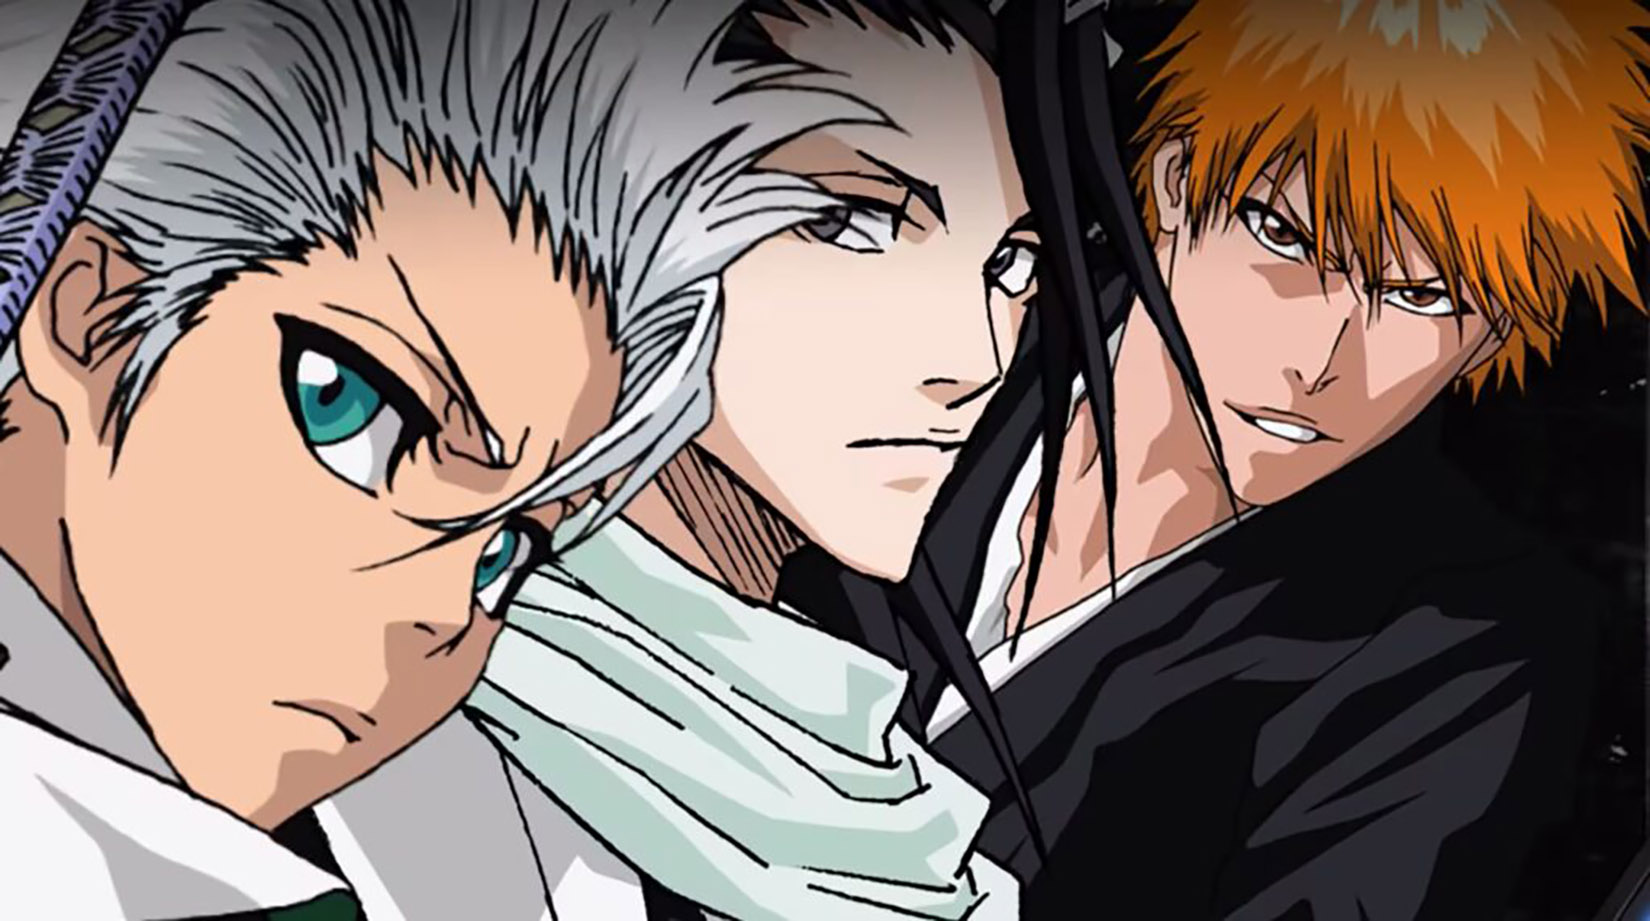 Live-Action 'Bleach' Teaser Has Big Hair and Bigger Swords